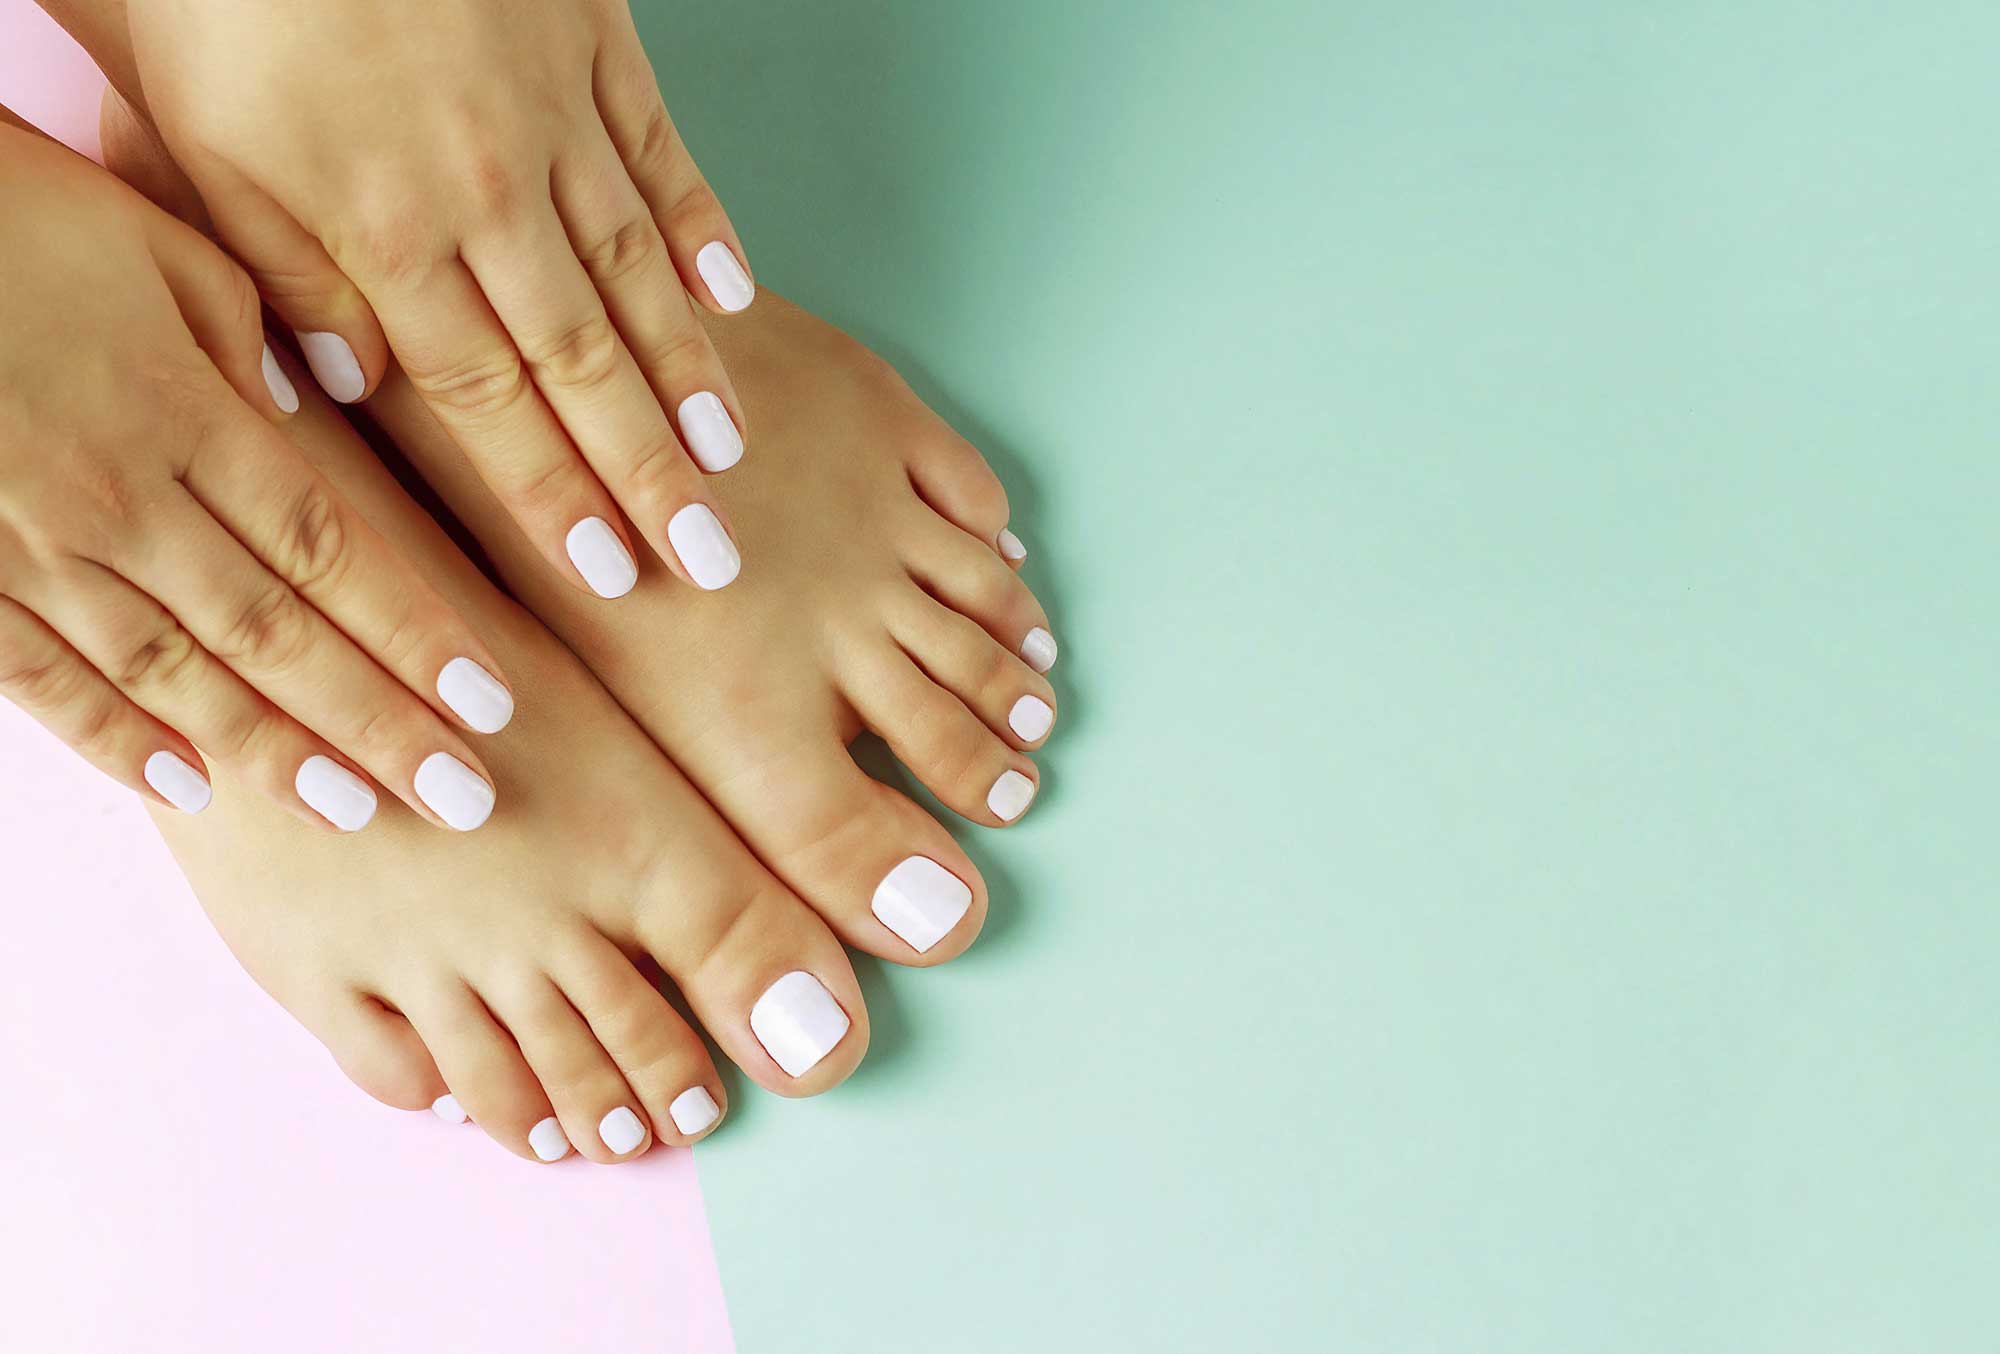 Manicure and Pedicure Nail Art Ideas - wide 7